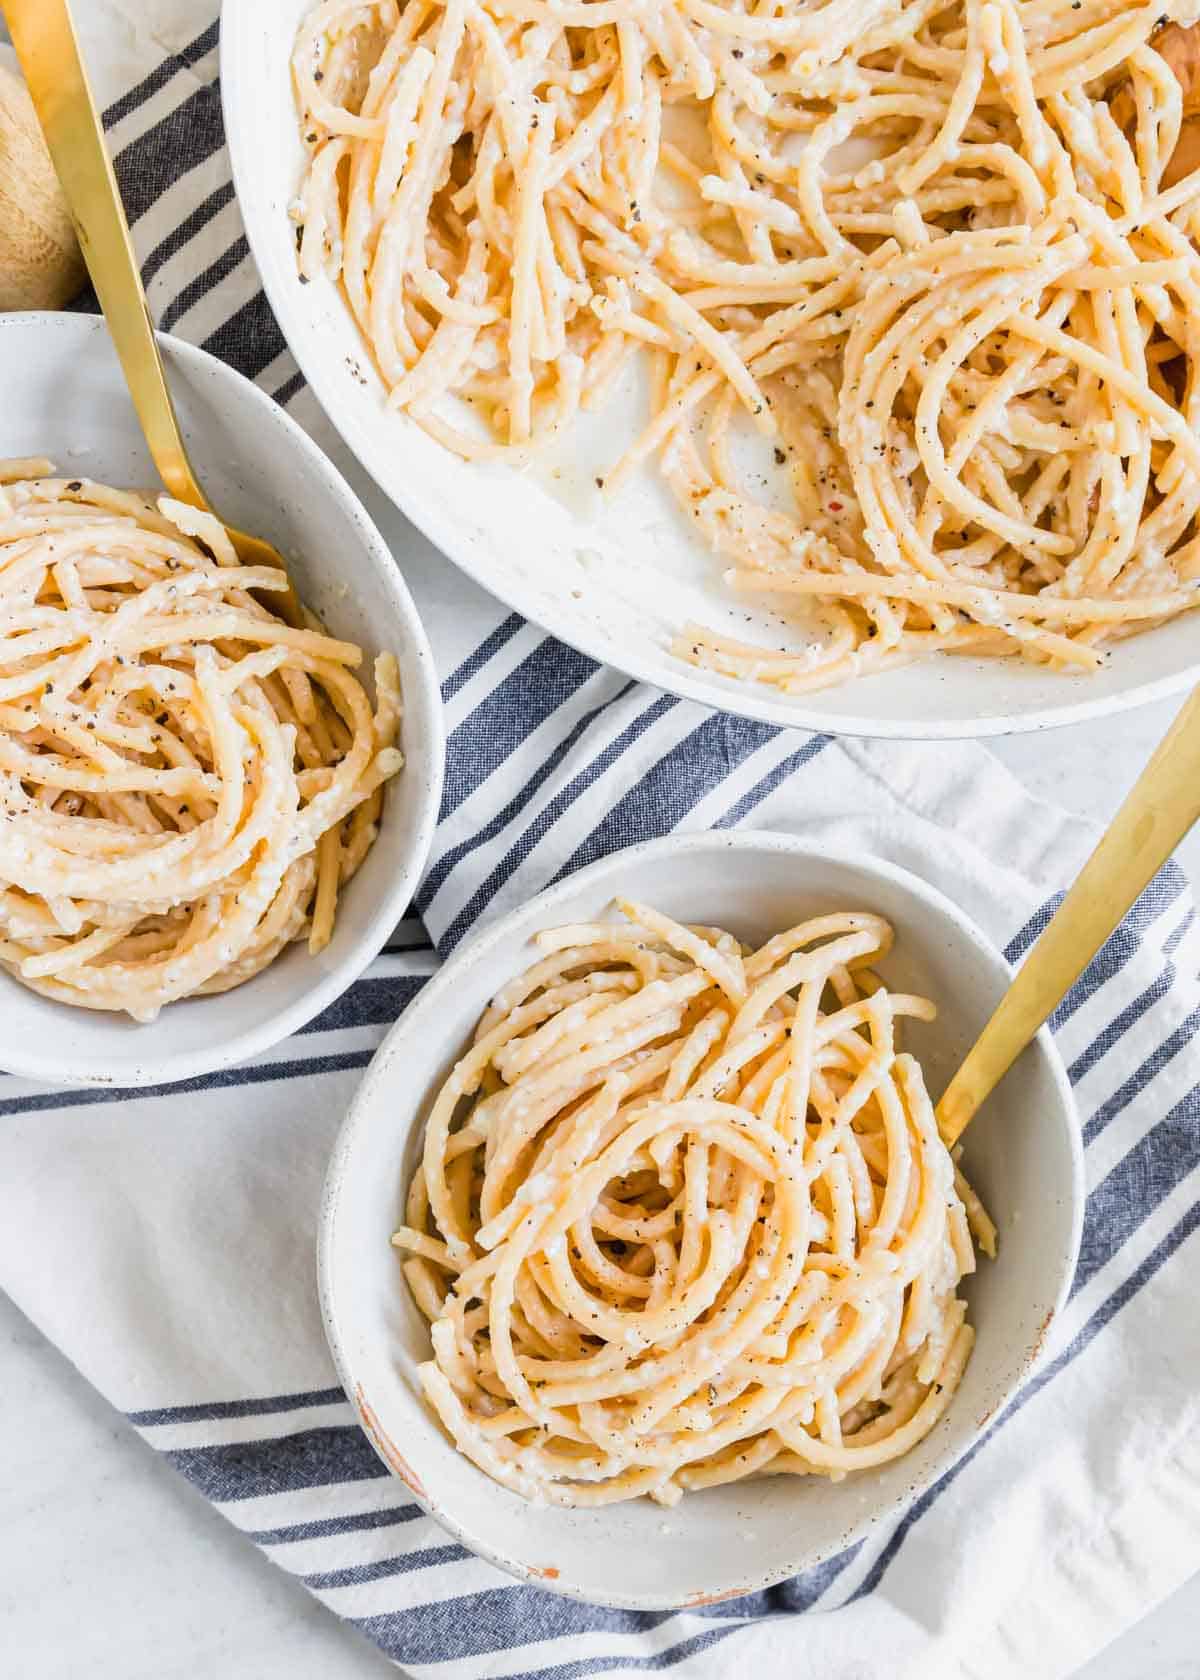 Bucatini cacio e pepe in bowls with gold forks and a skillet in the background.